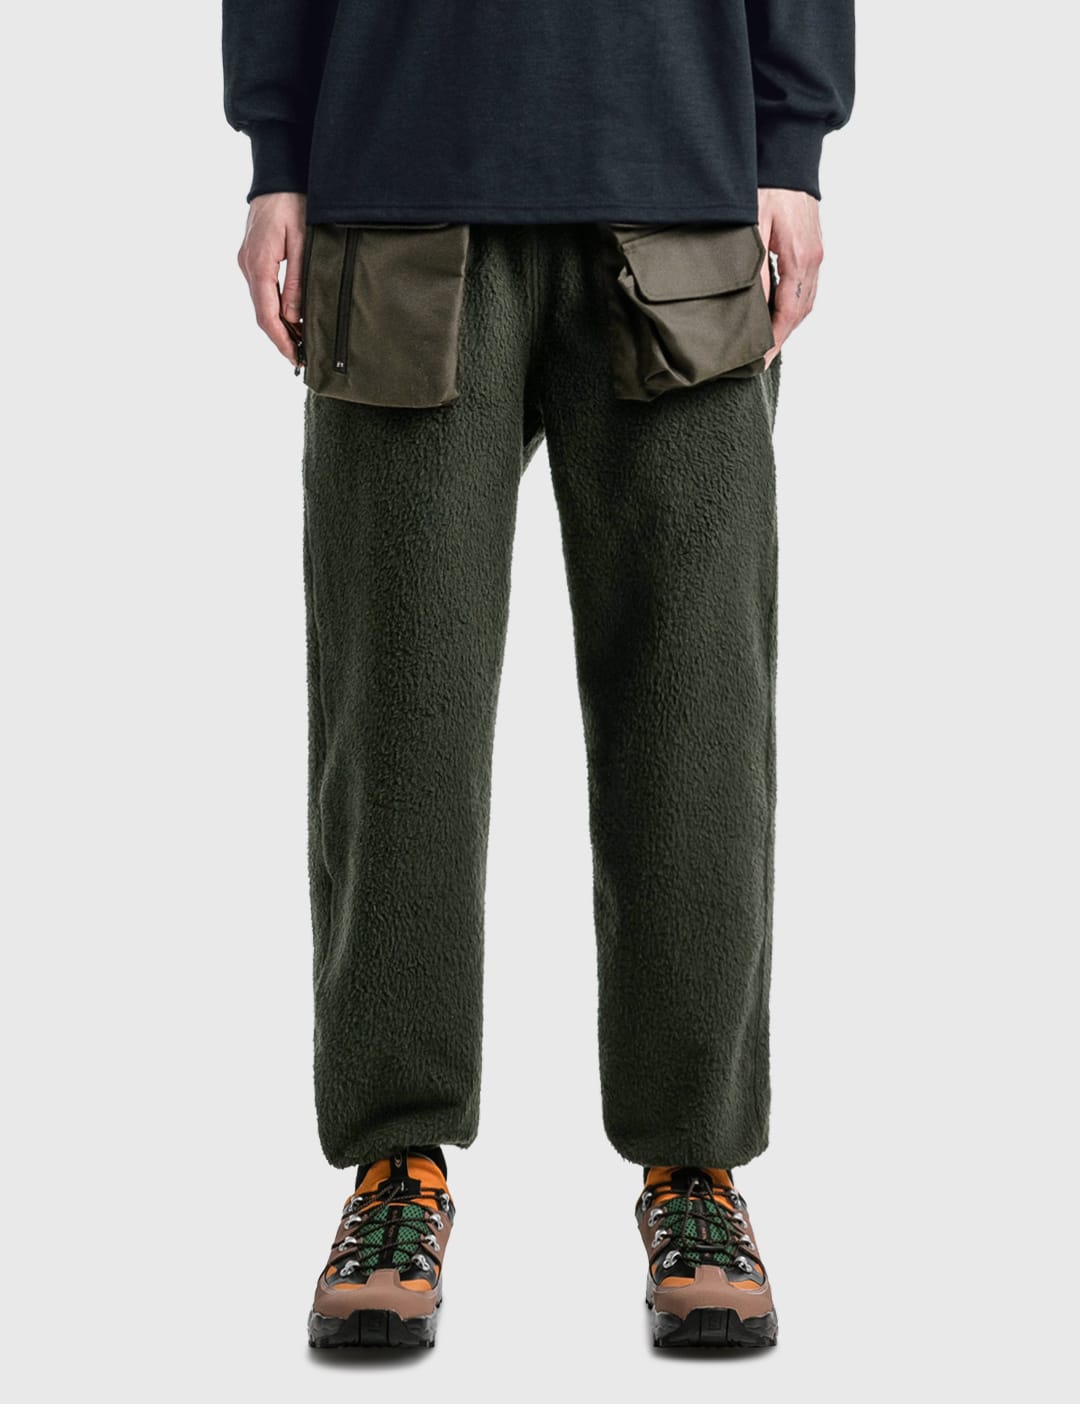 South2 West8 - Tenkara Trout Sweat Pants | HBX - Globally Curated